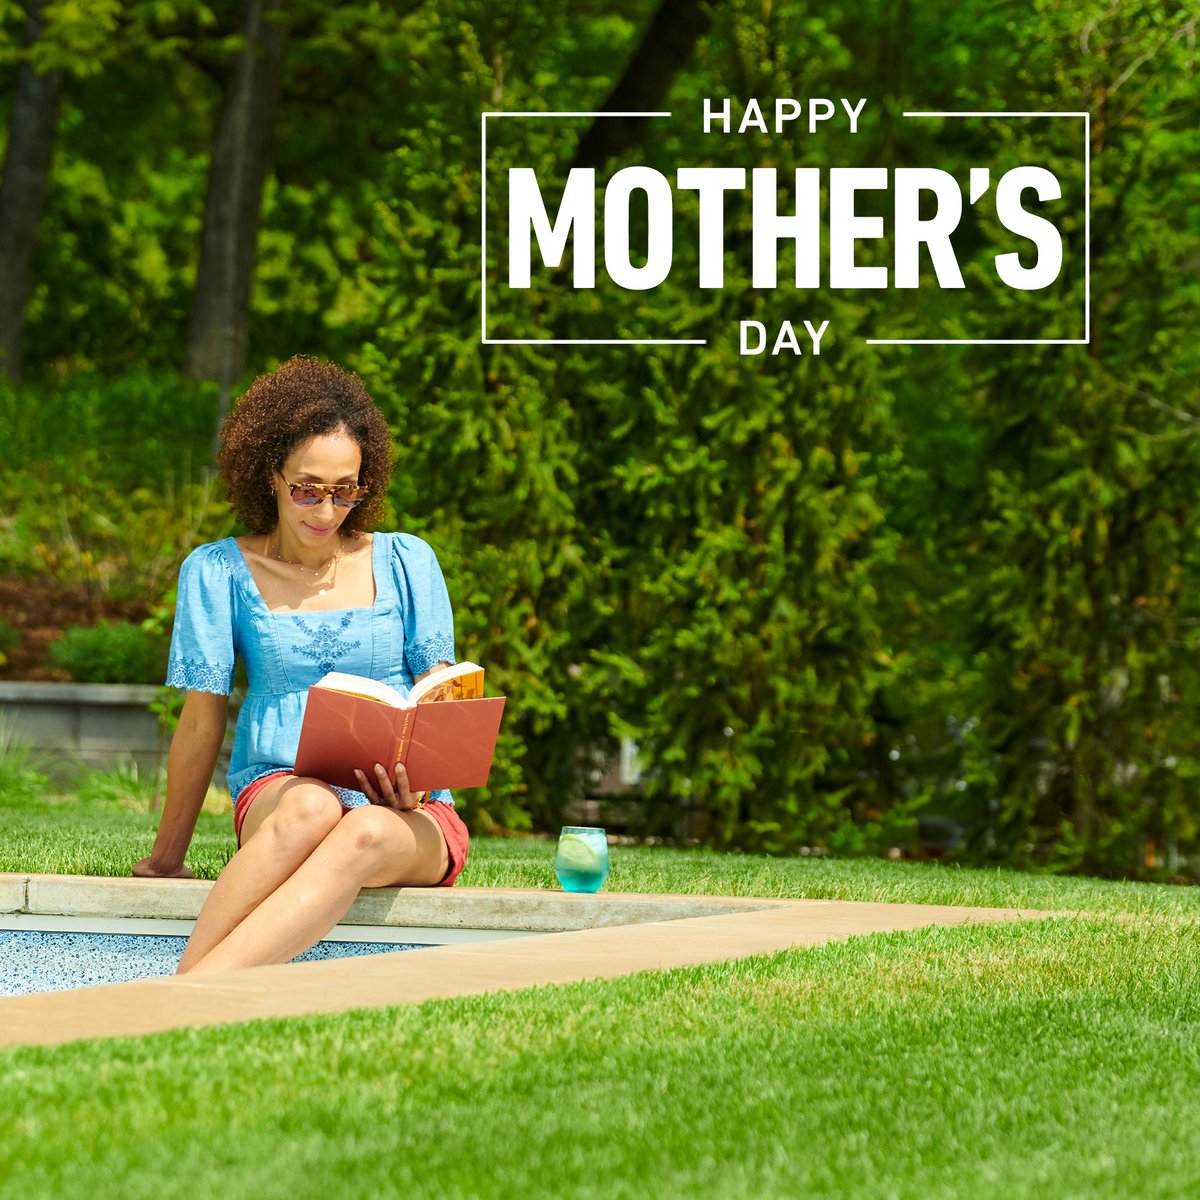 Shoutout to all the hard-working moms. We hope your Mother's Day is full of R&R! #mothersday #ToroYard